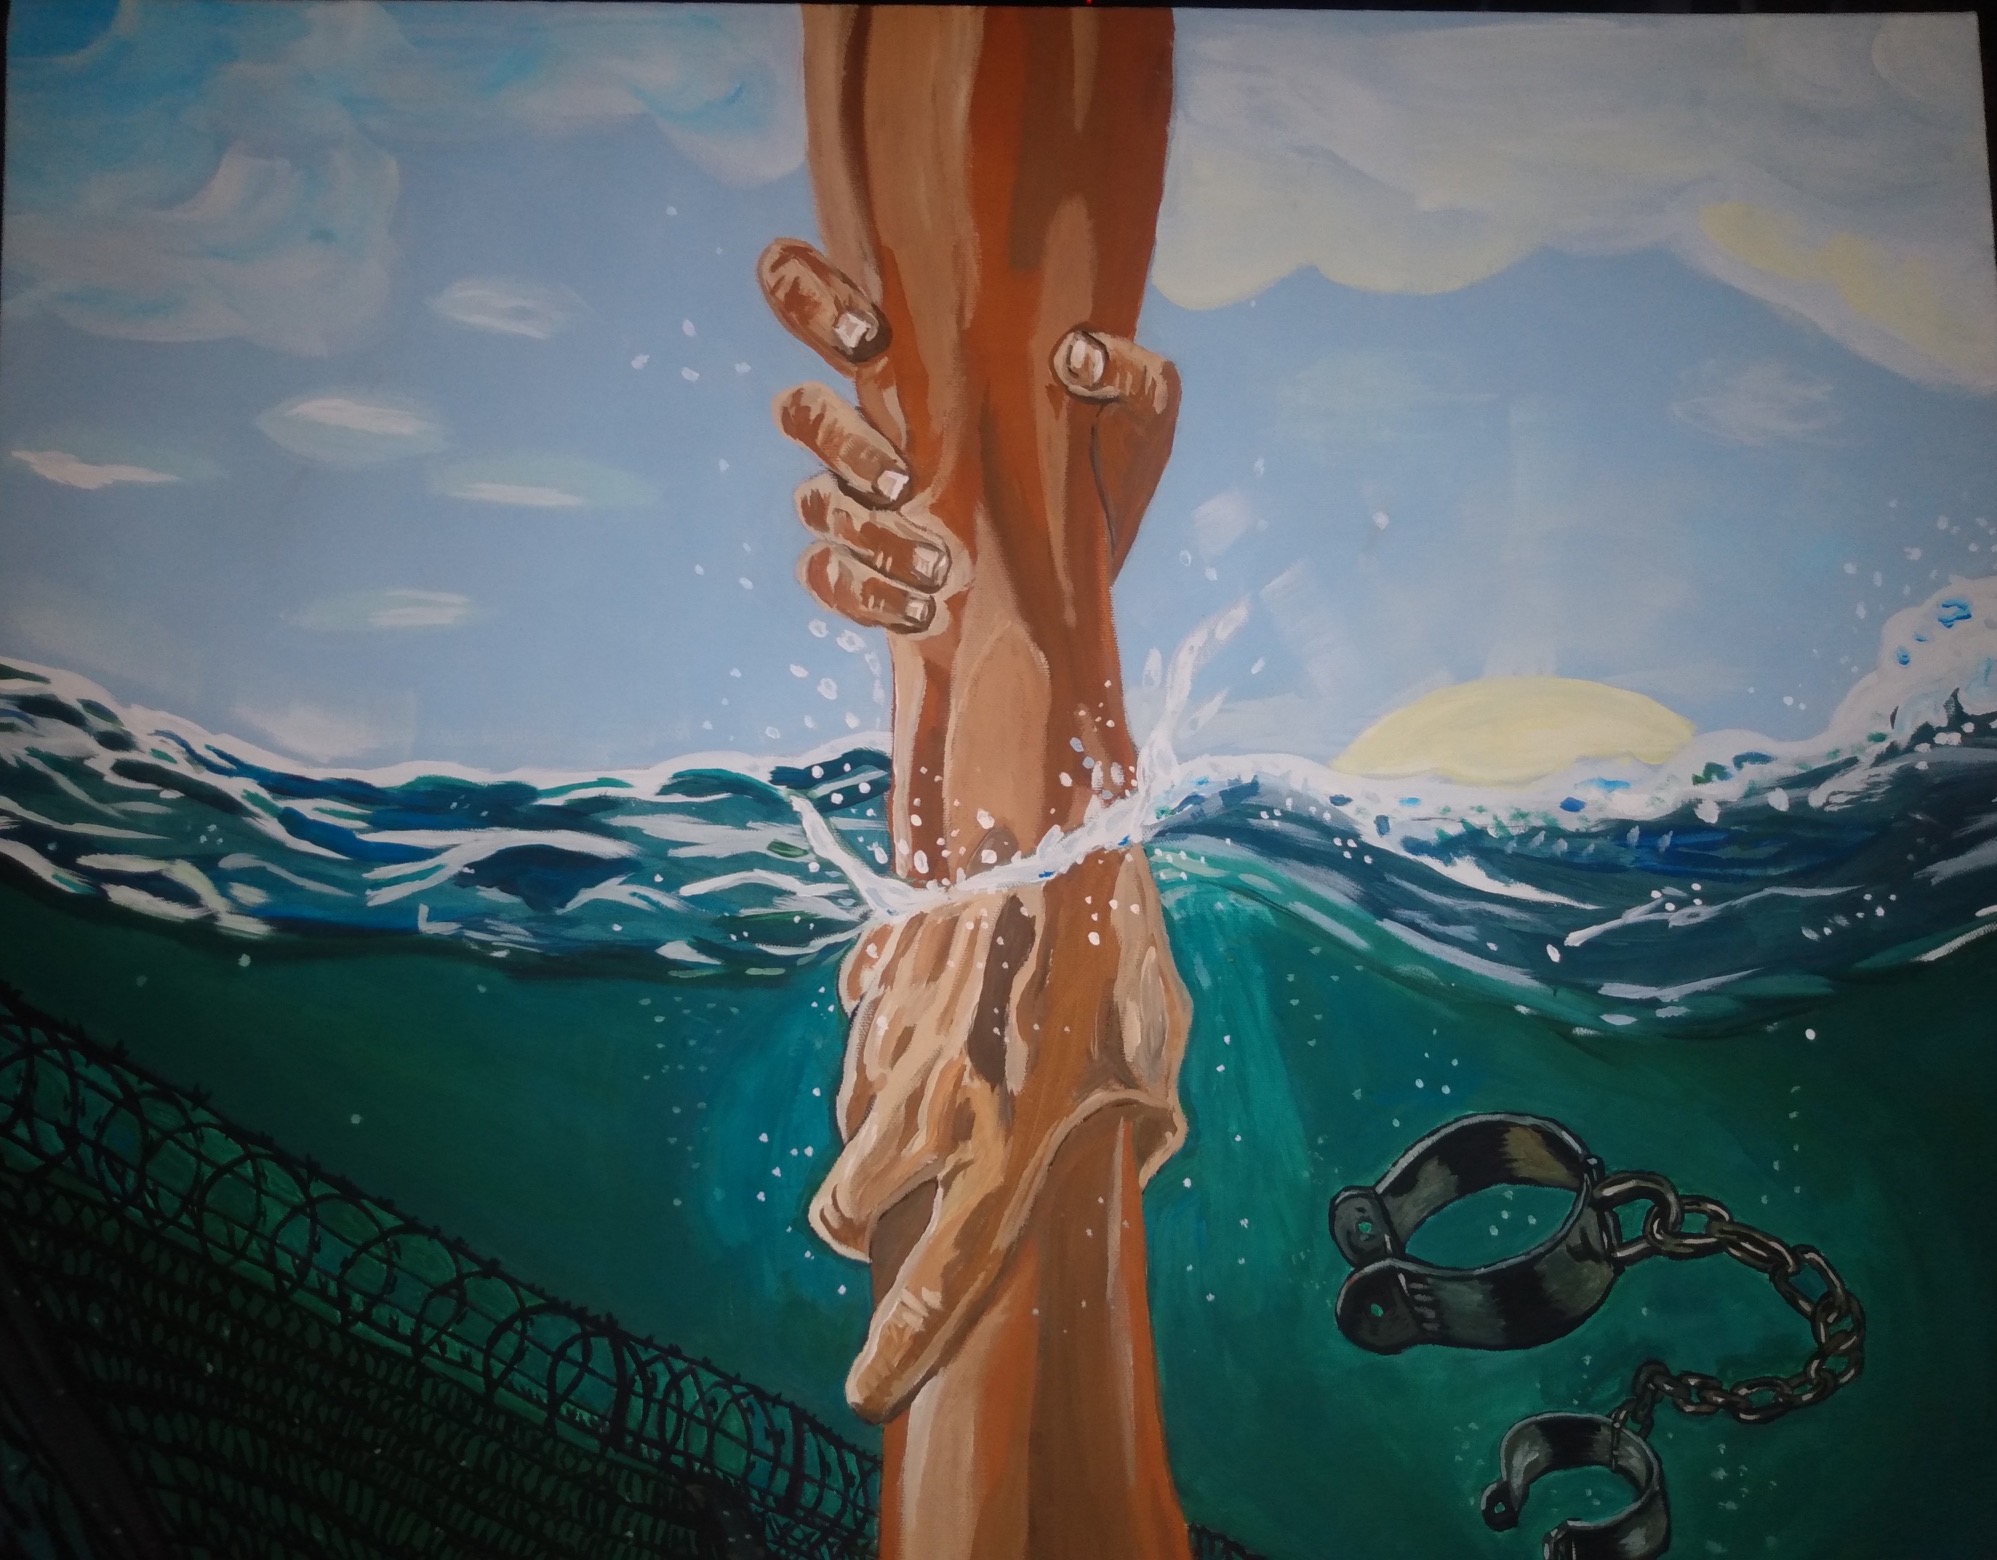 Hiawatha Cuffee, "Rise." Painting of a hand reaching into water and grasping another hand. A shackle can be seen under the water.